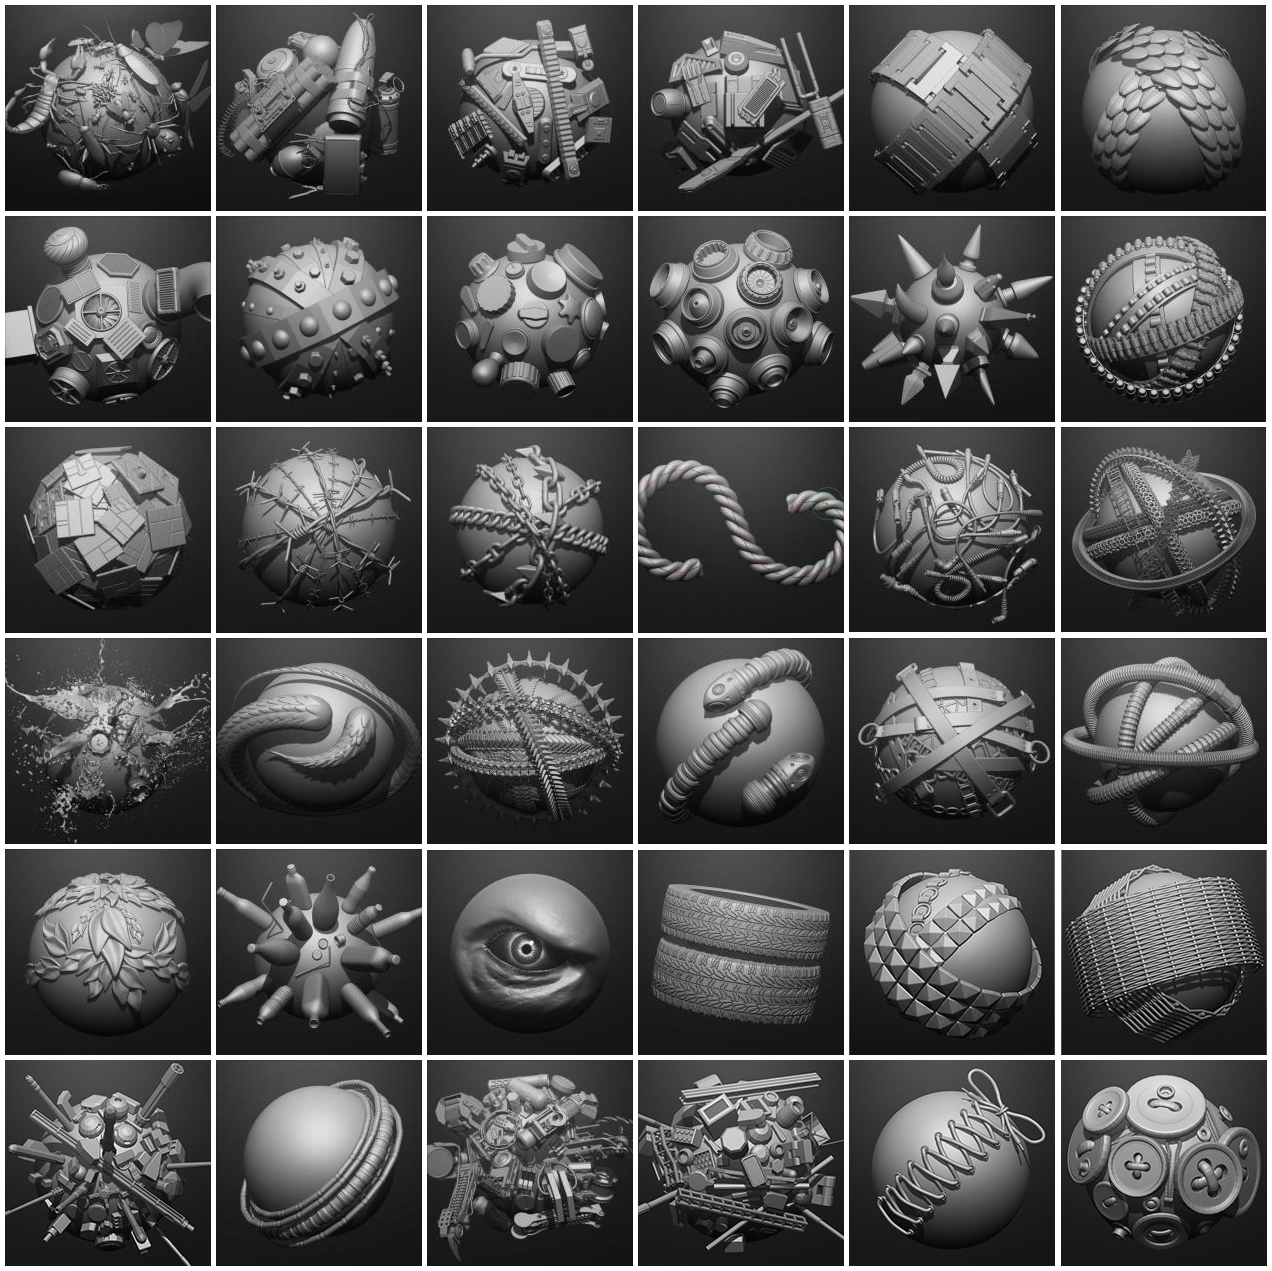 orb brushes zbrush free download